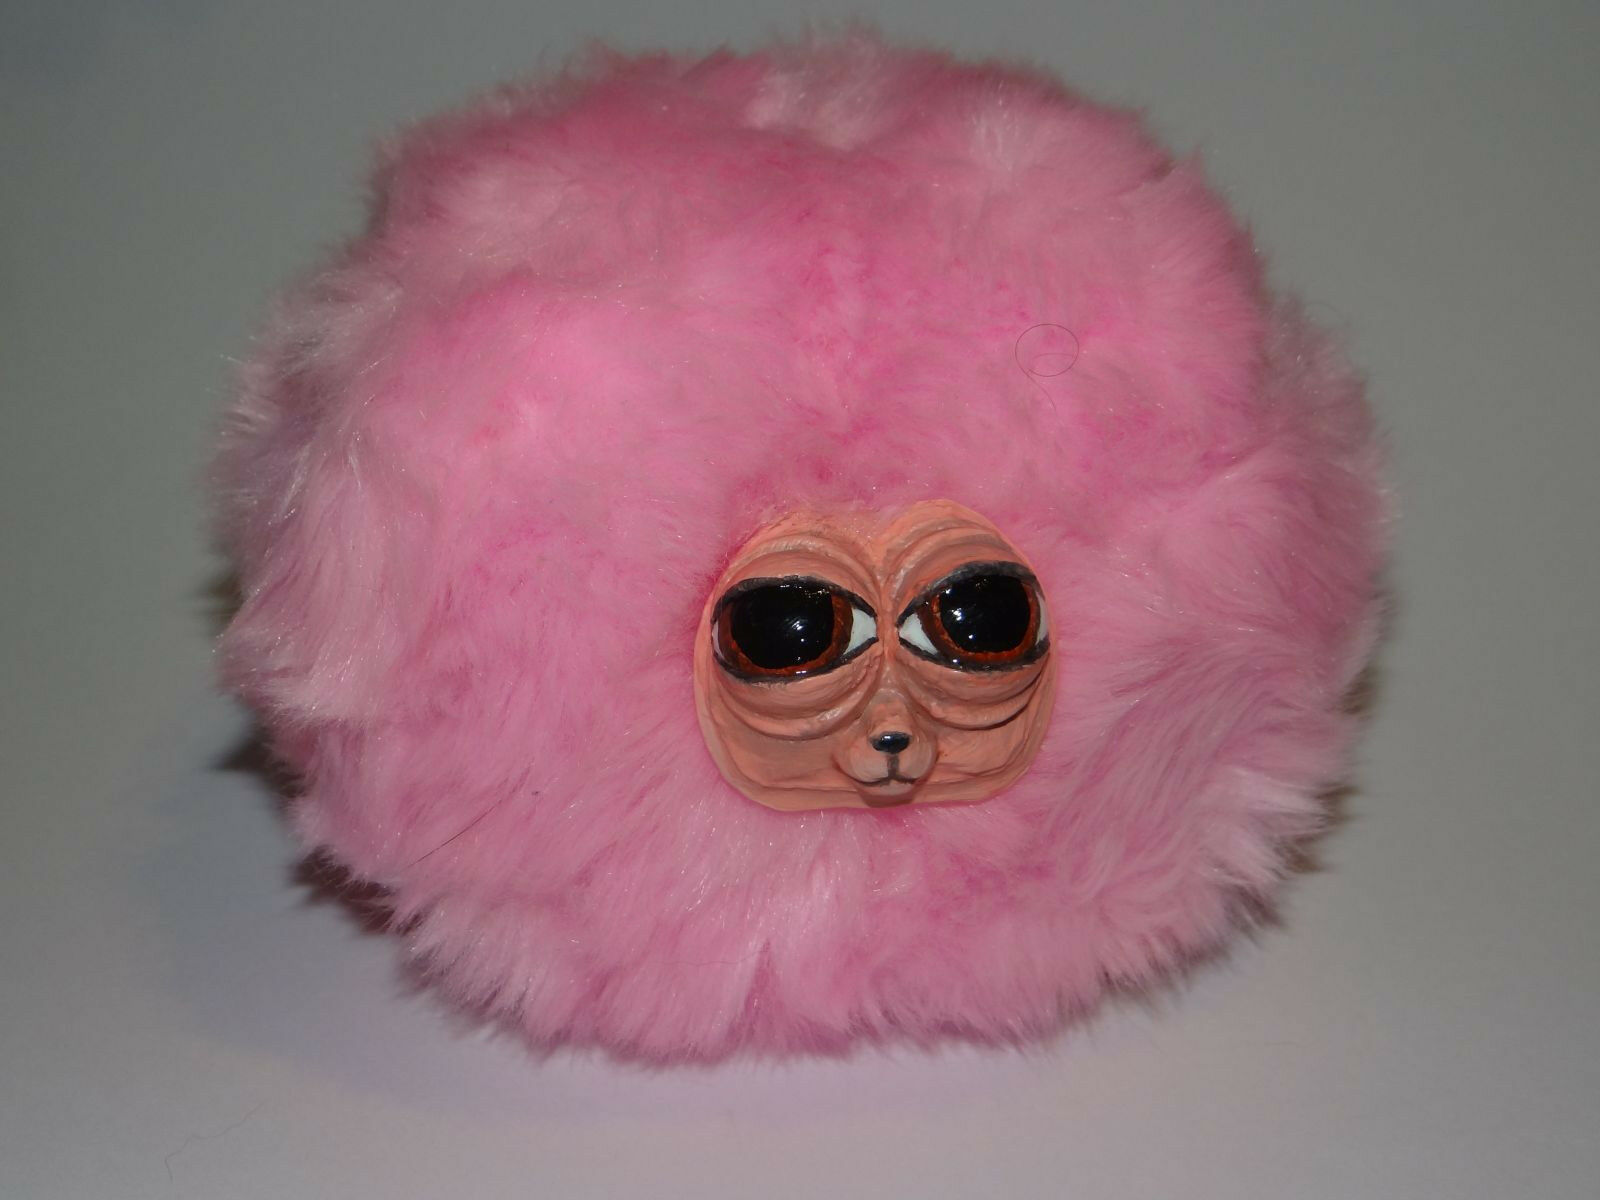 https://www.printingin3d.eu/pictures/products/pygmypuff_giant/giant-pygmy-1.jpg